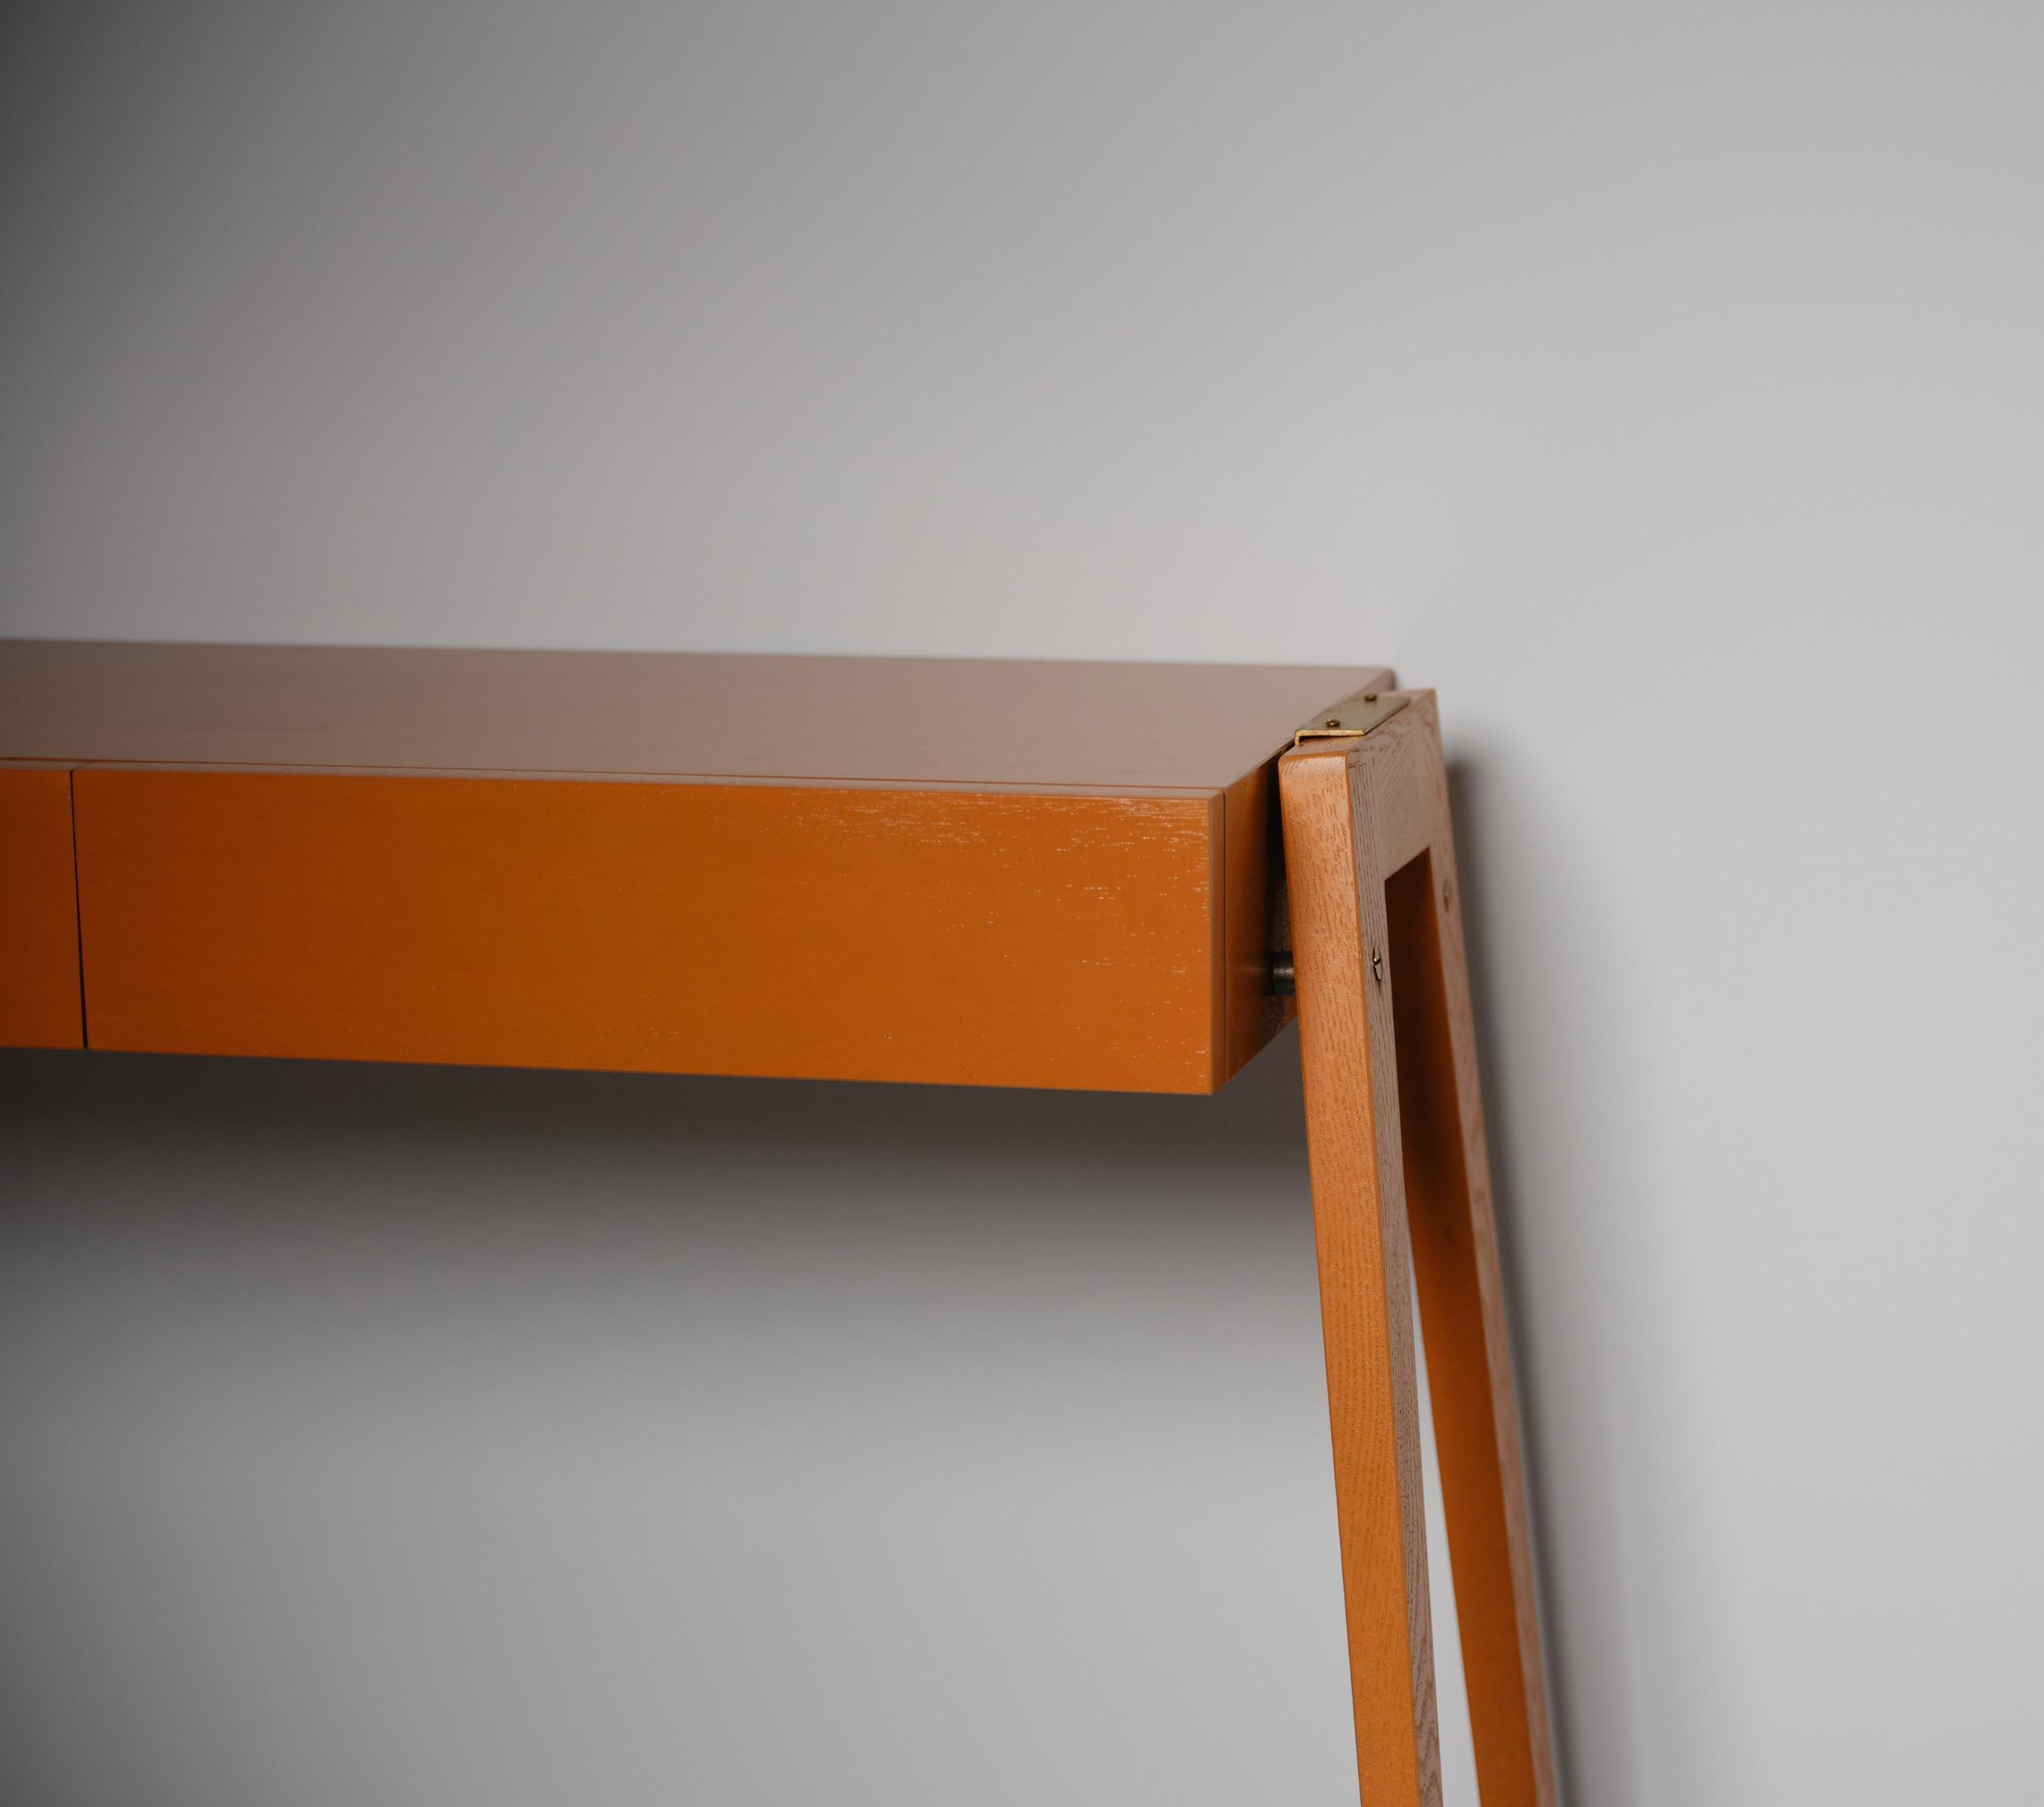 Mid-20th Century Italian Design Console from the 1950s: Restyled Elegance in Modern Rust Orange